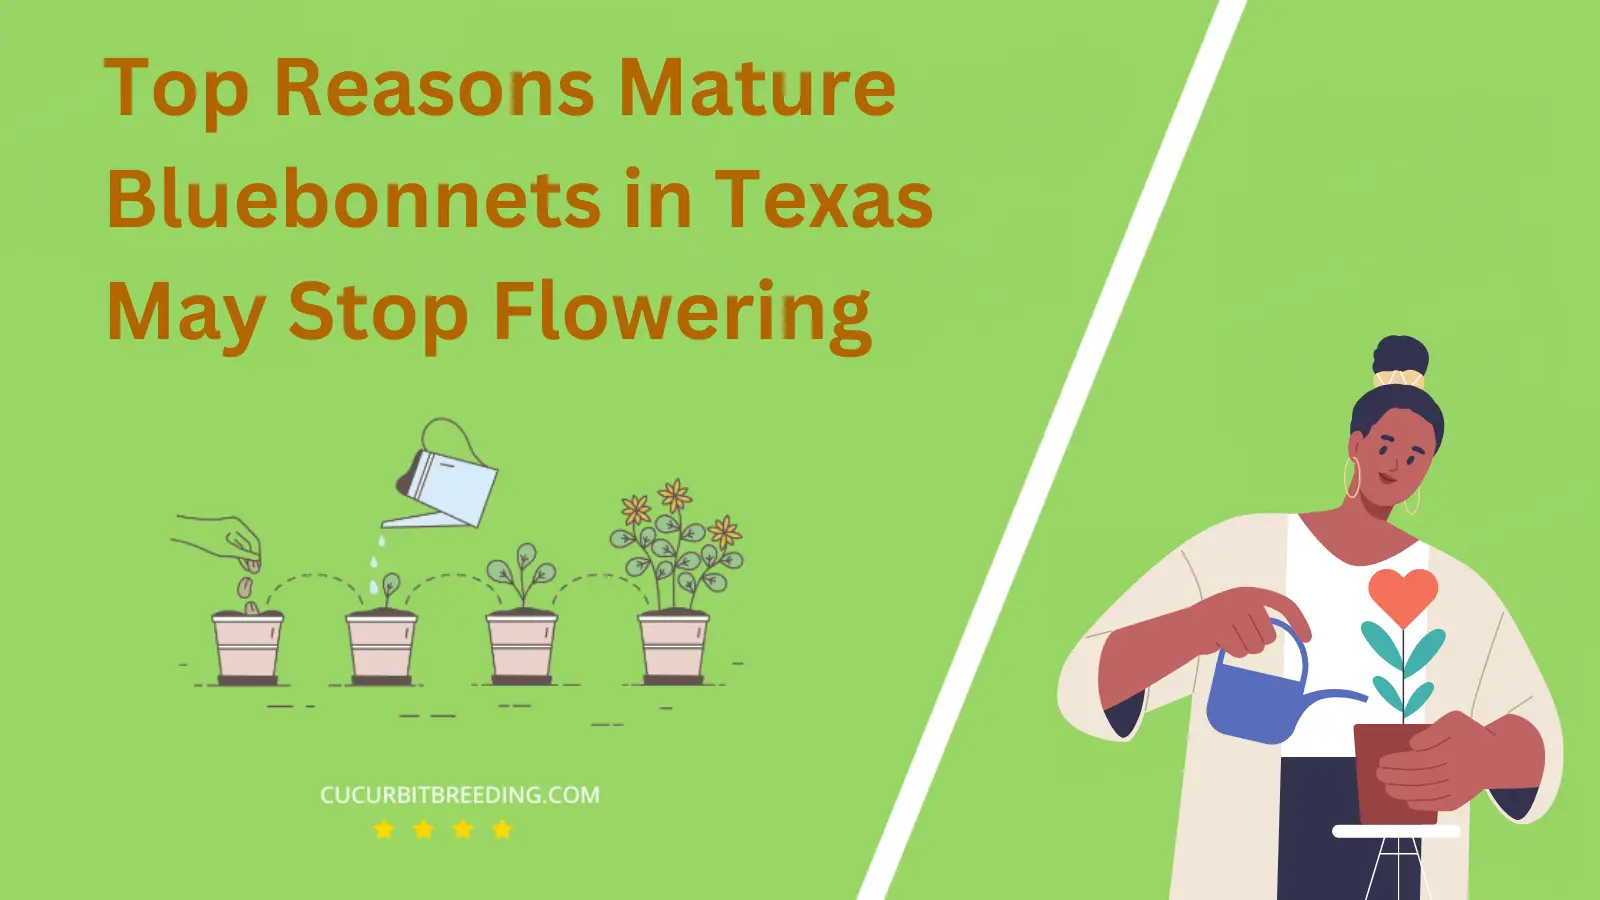 Top Reasons Mature Bluebonnets in Texas May Stop Flowering